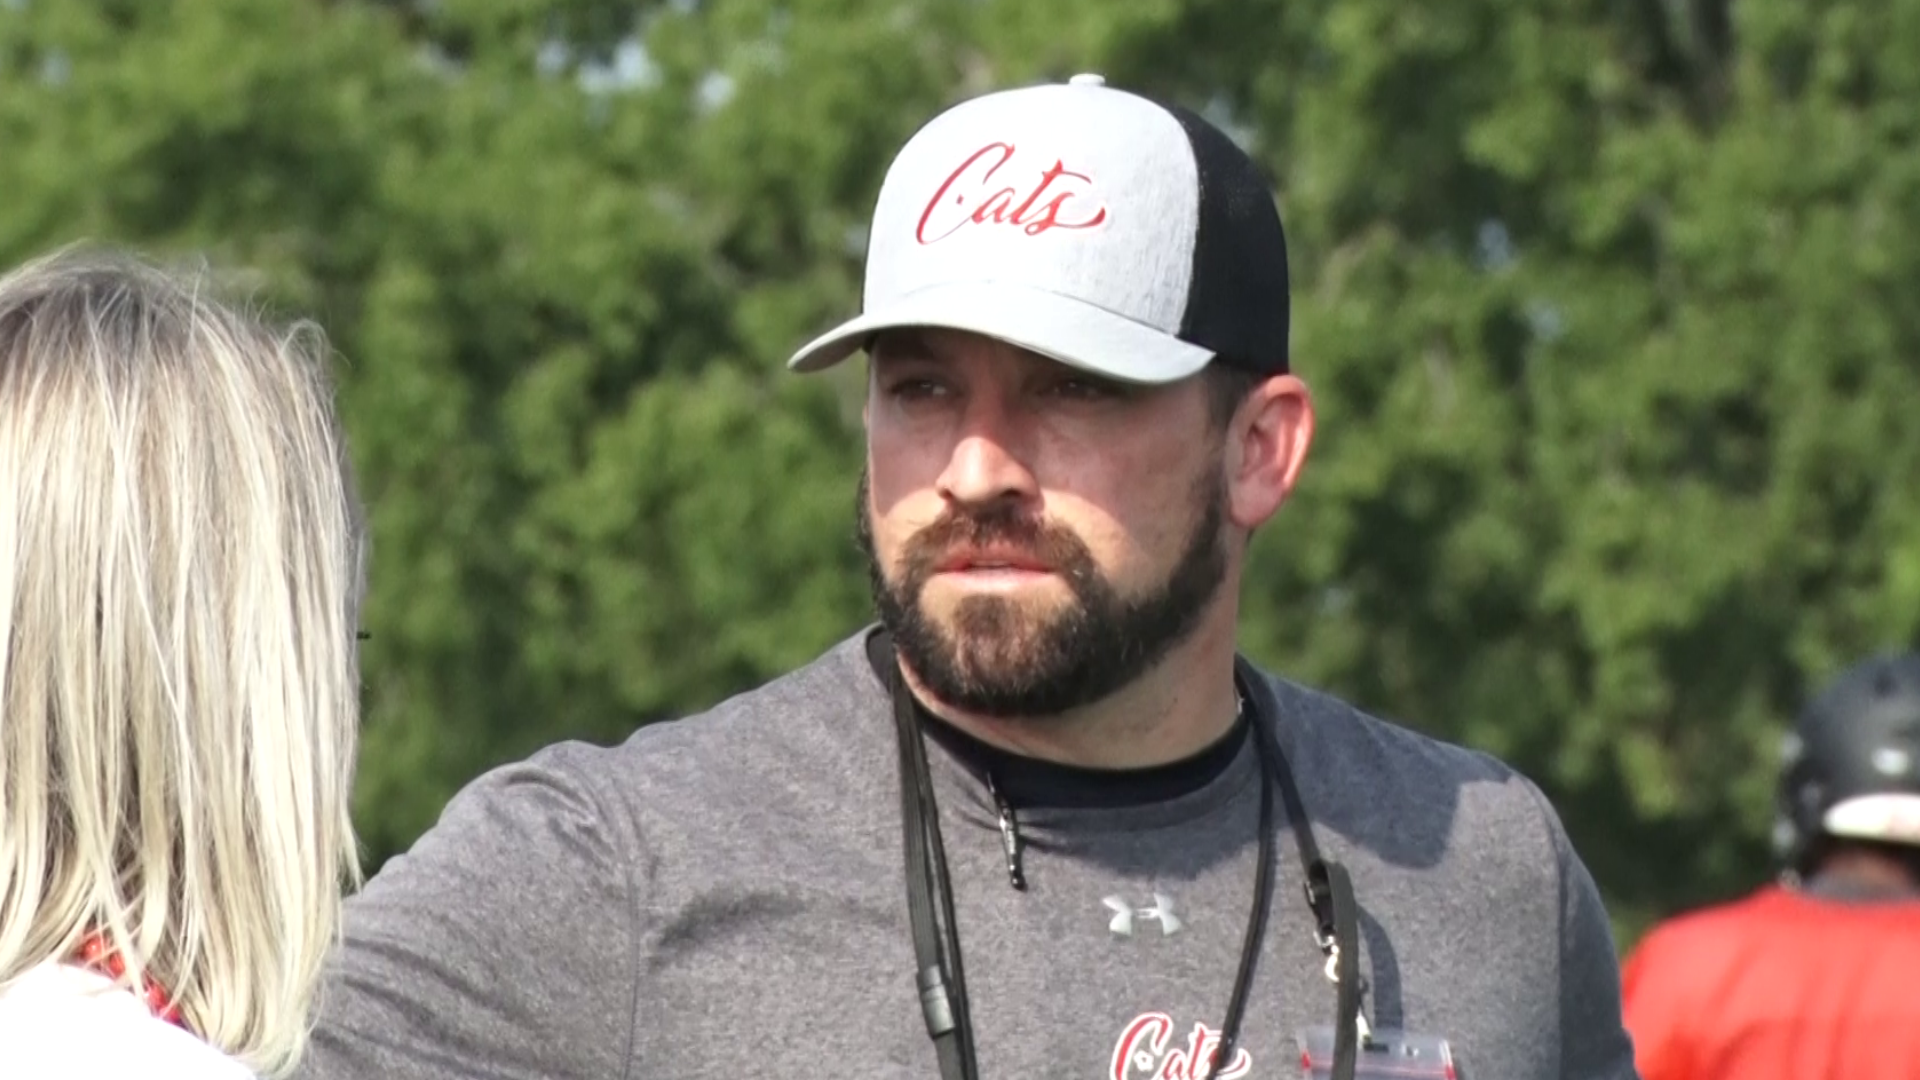 Mexia ISD Athletic Director and Head Football Coach Brady Bond resigned Aug. 20, according to the school district.